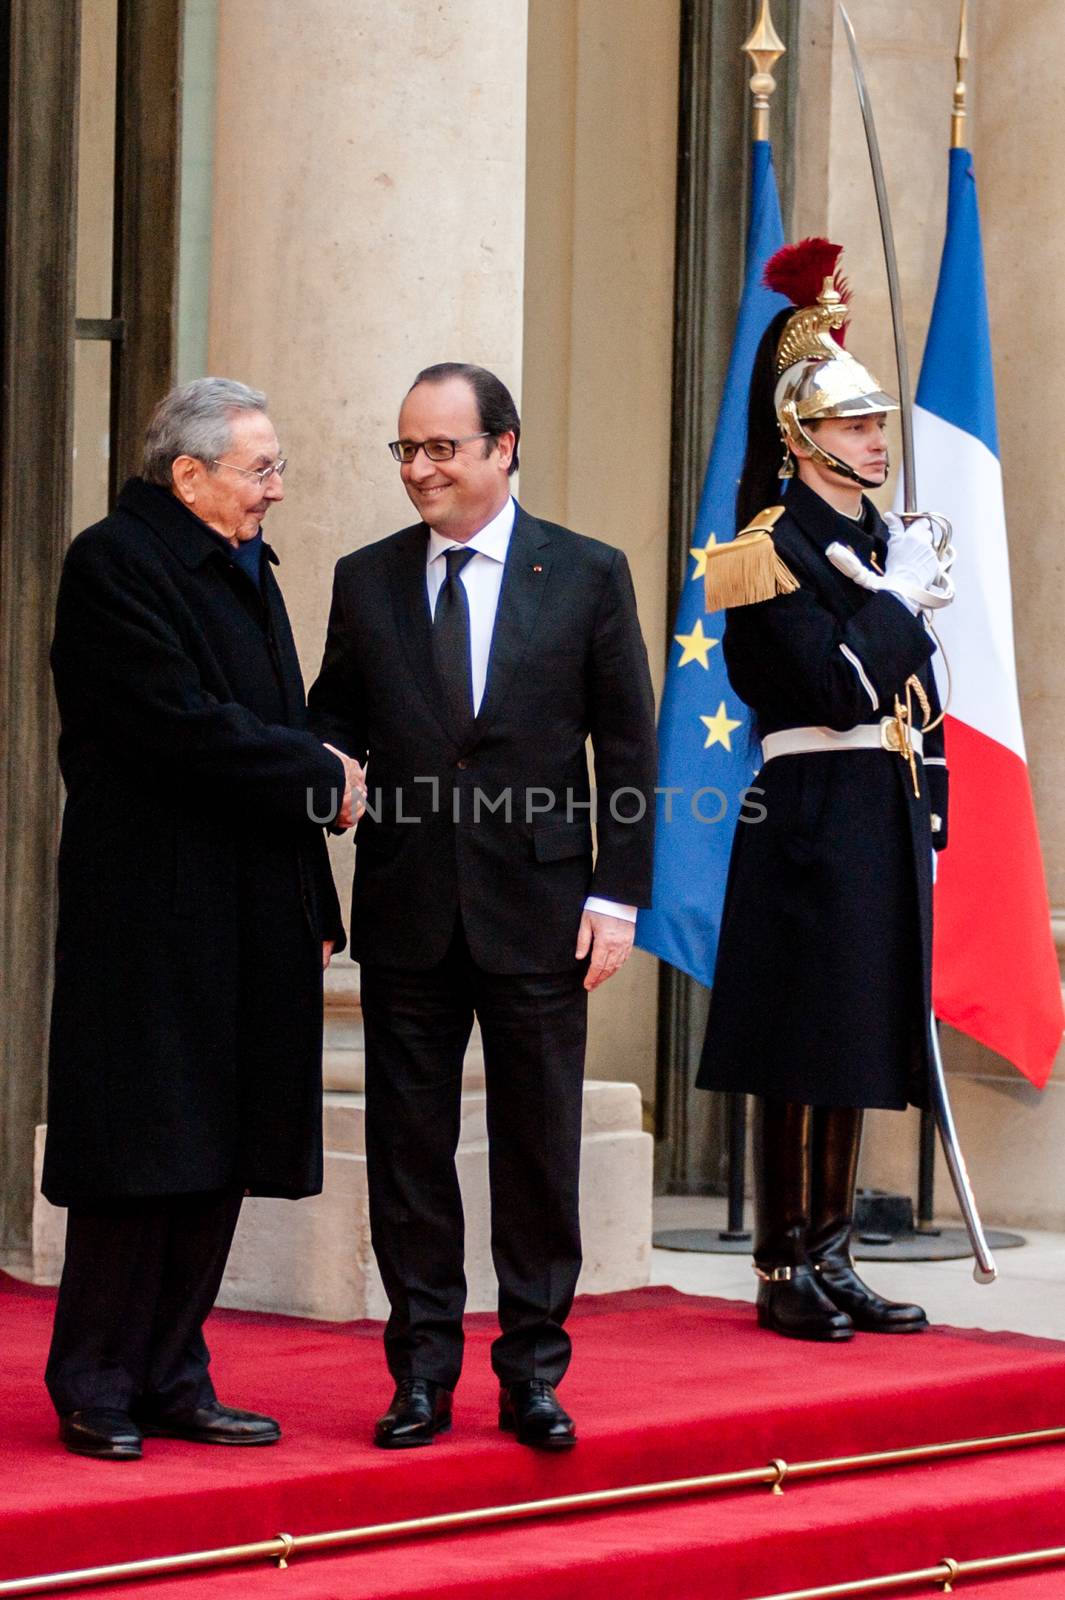 FRANCE, Paris: French President Francois Hollande (R) welcomes Cuban President Raul Castro upon his arrival on February 1, 2016 at the Elysee Presidential Palace in Paris.